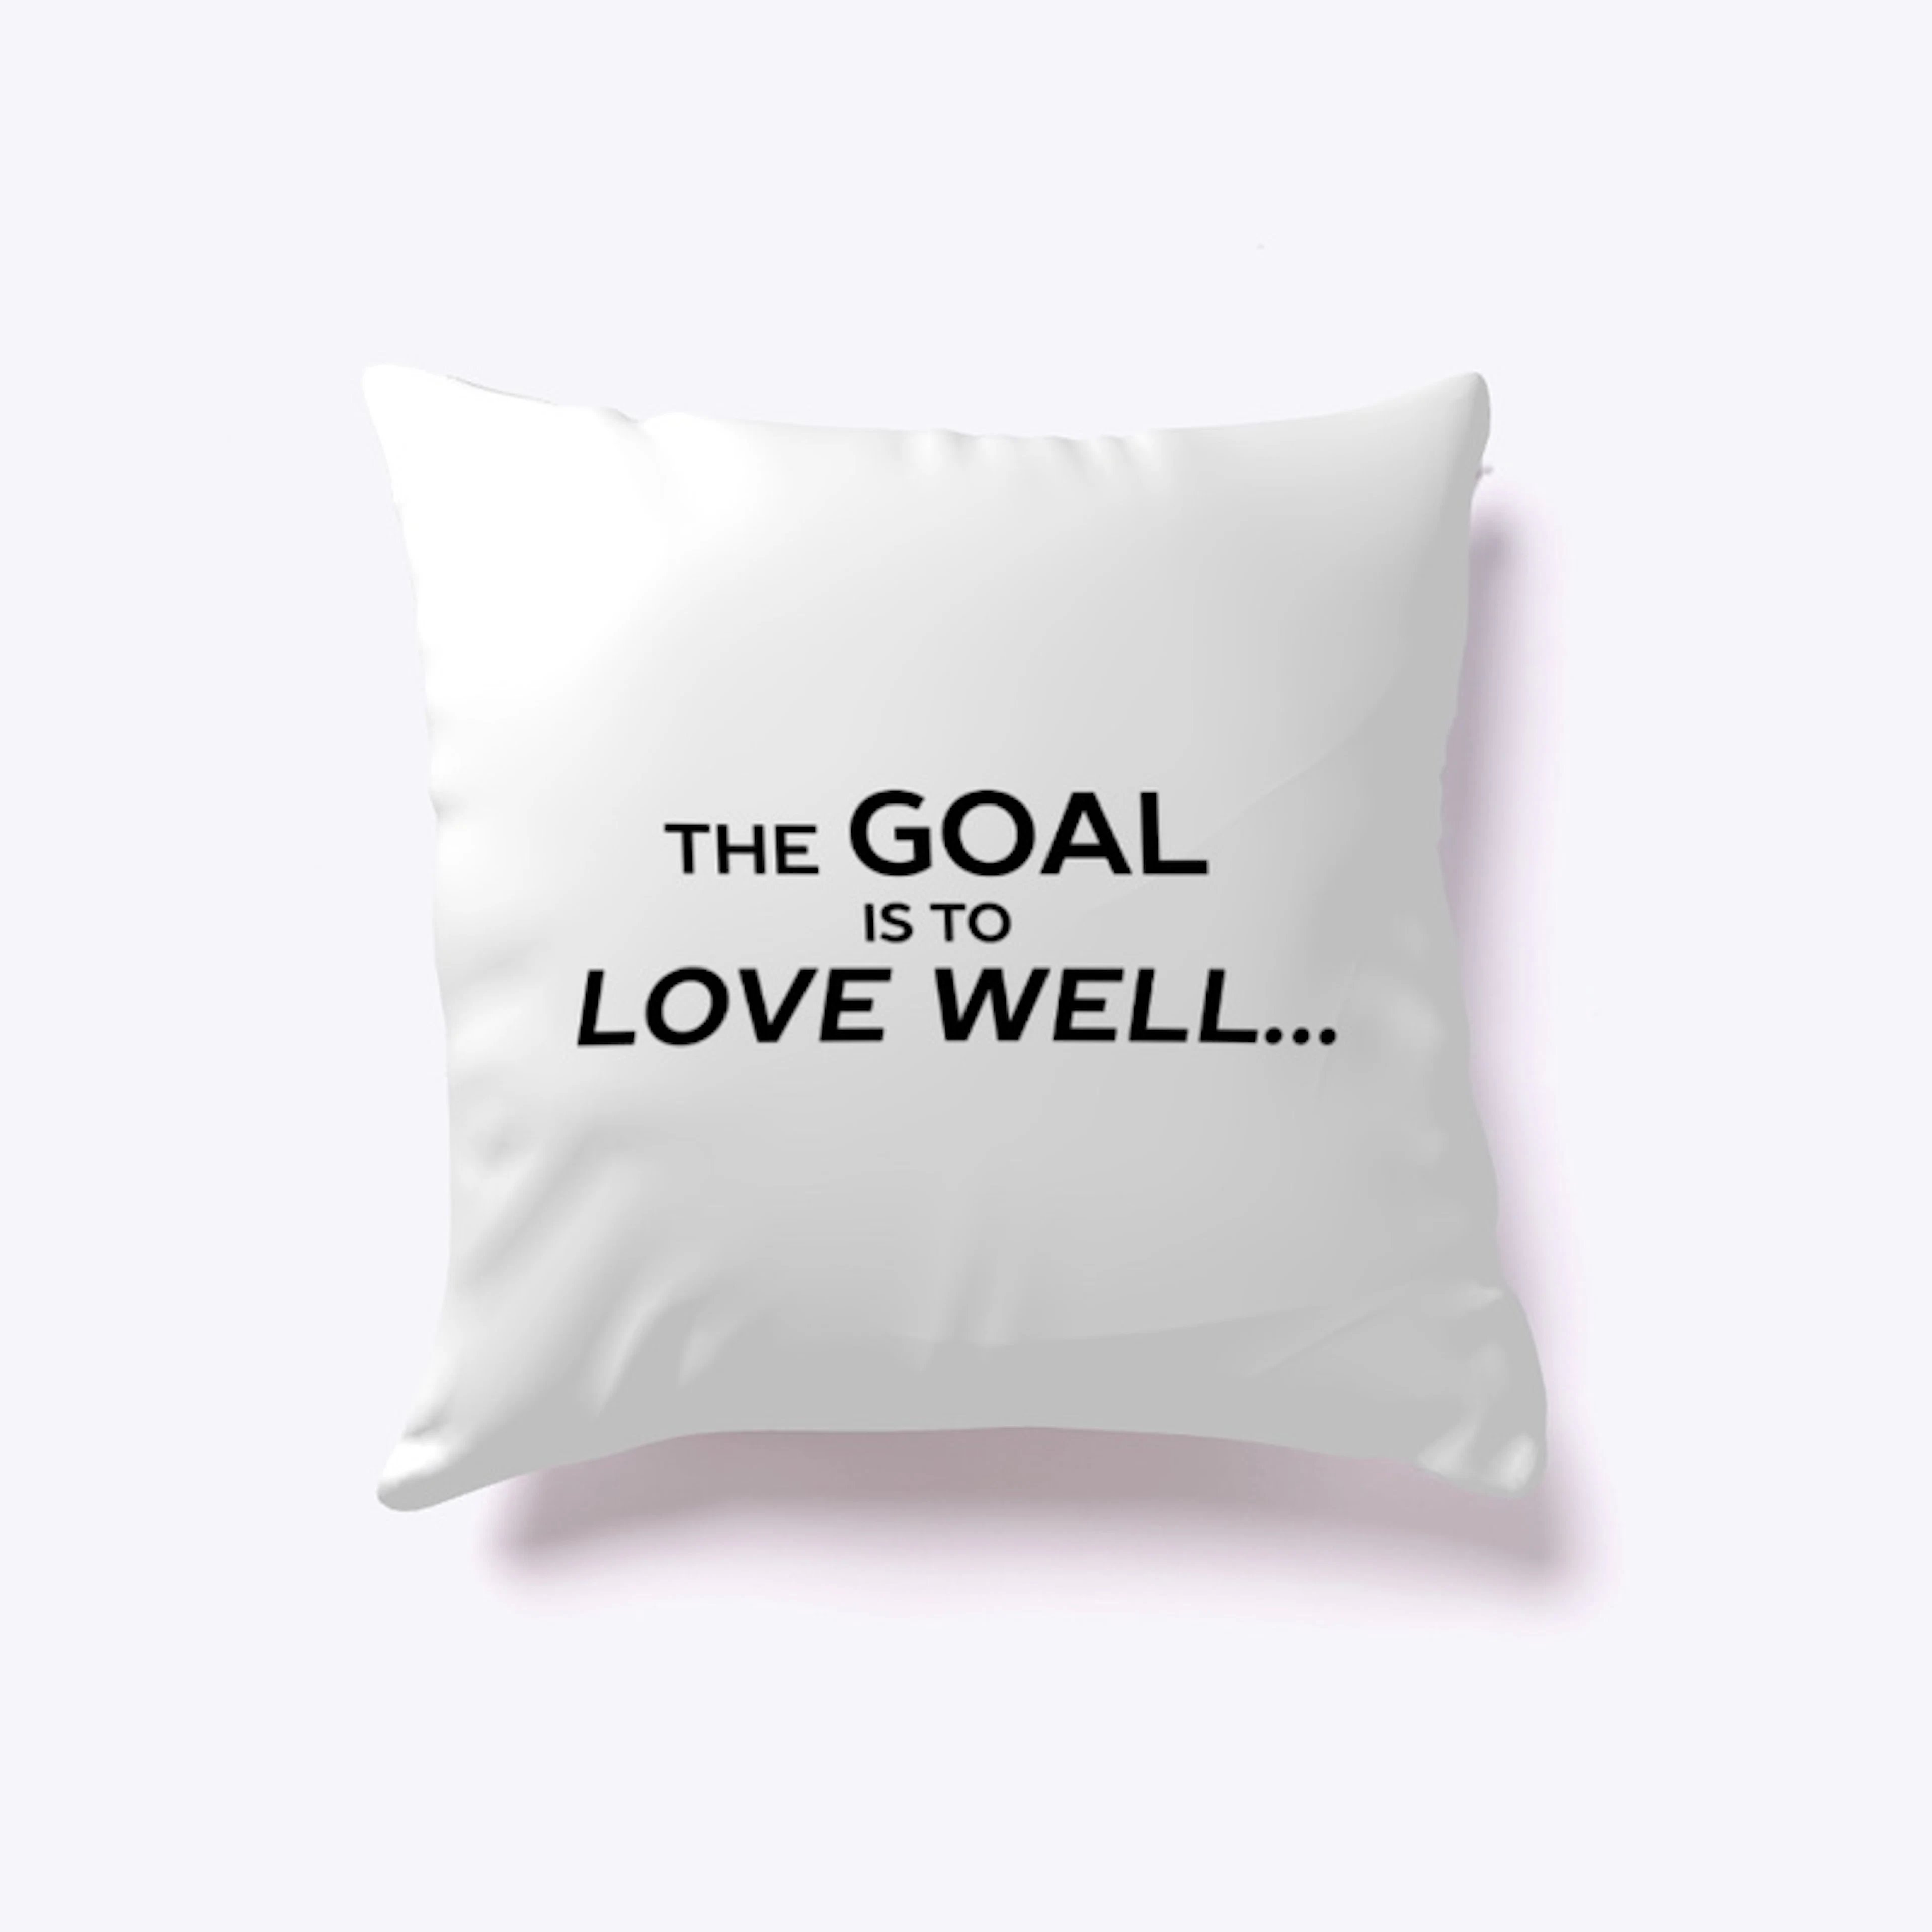 The Goal is to Love Well ...